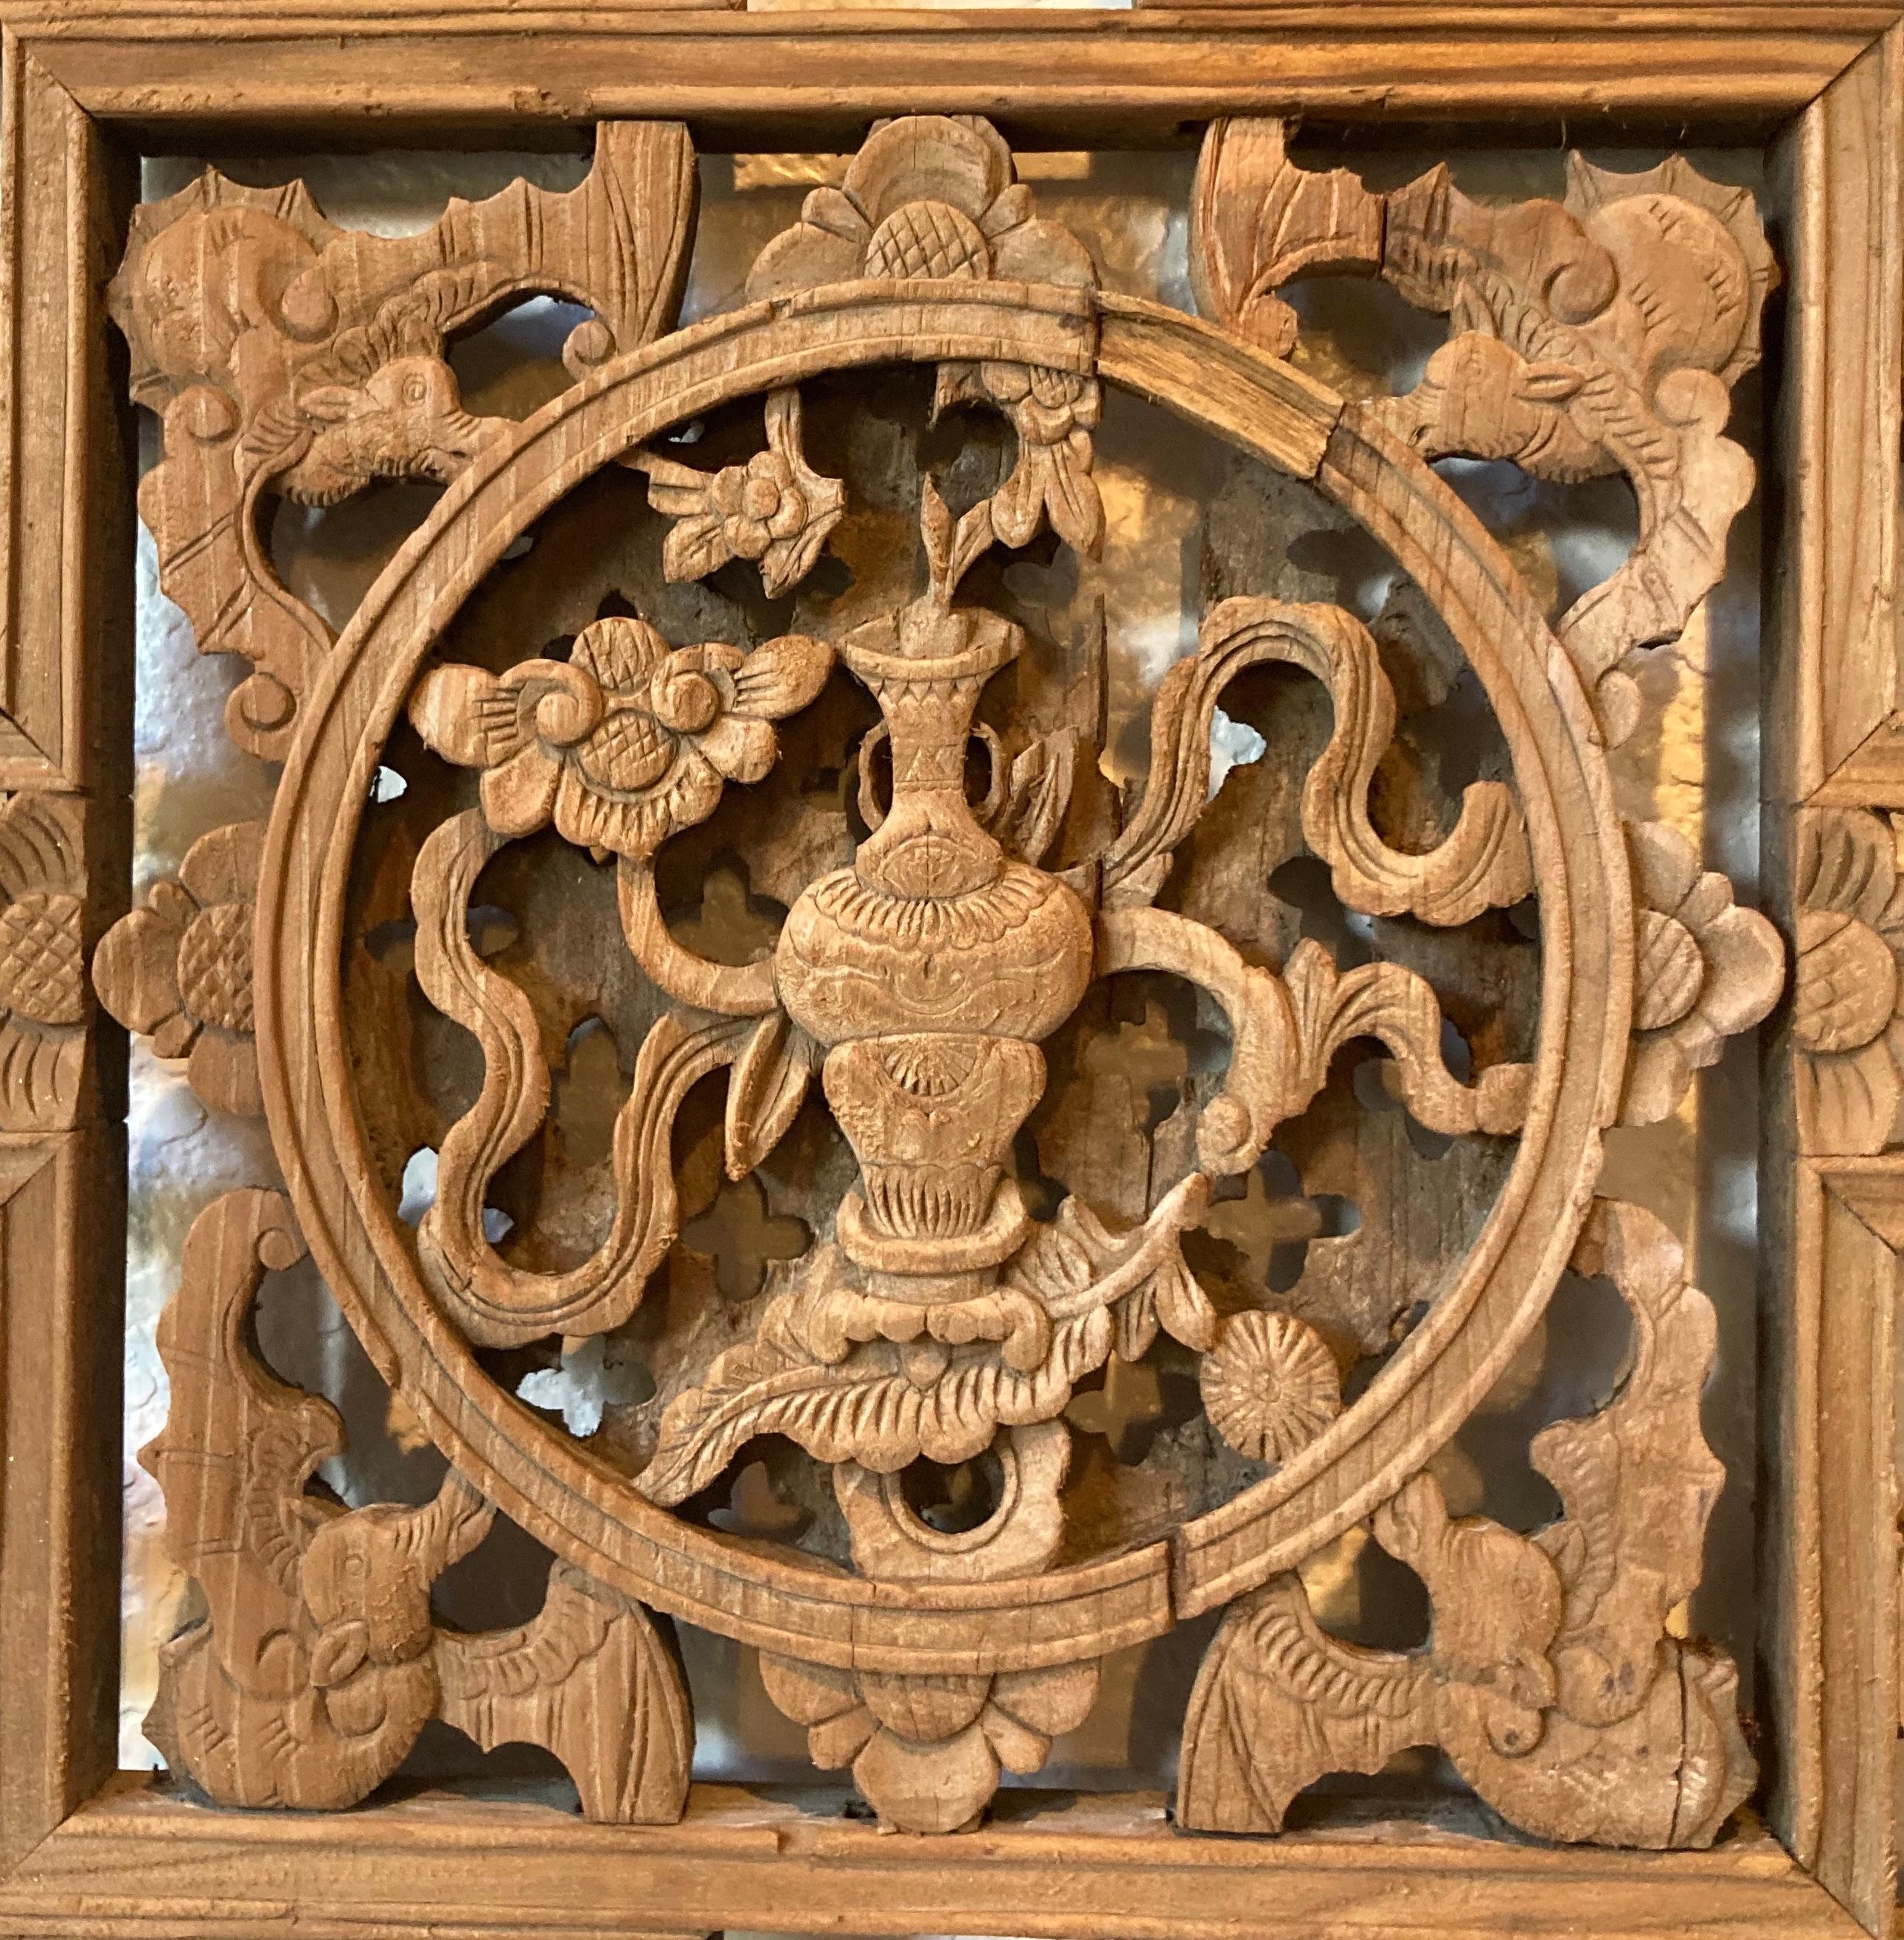 Lattice panels with mitered mortise and tenon joints. Panels include square center carving with vase/floral and bat motifs, and multiple small carved objects with floral motif.